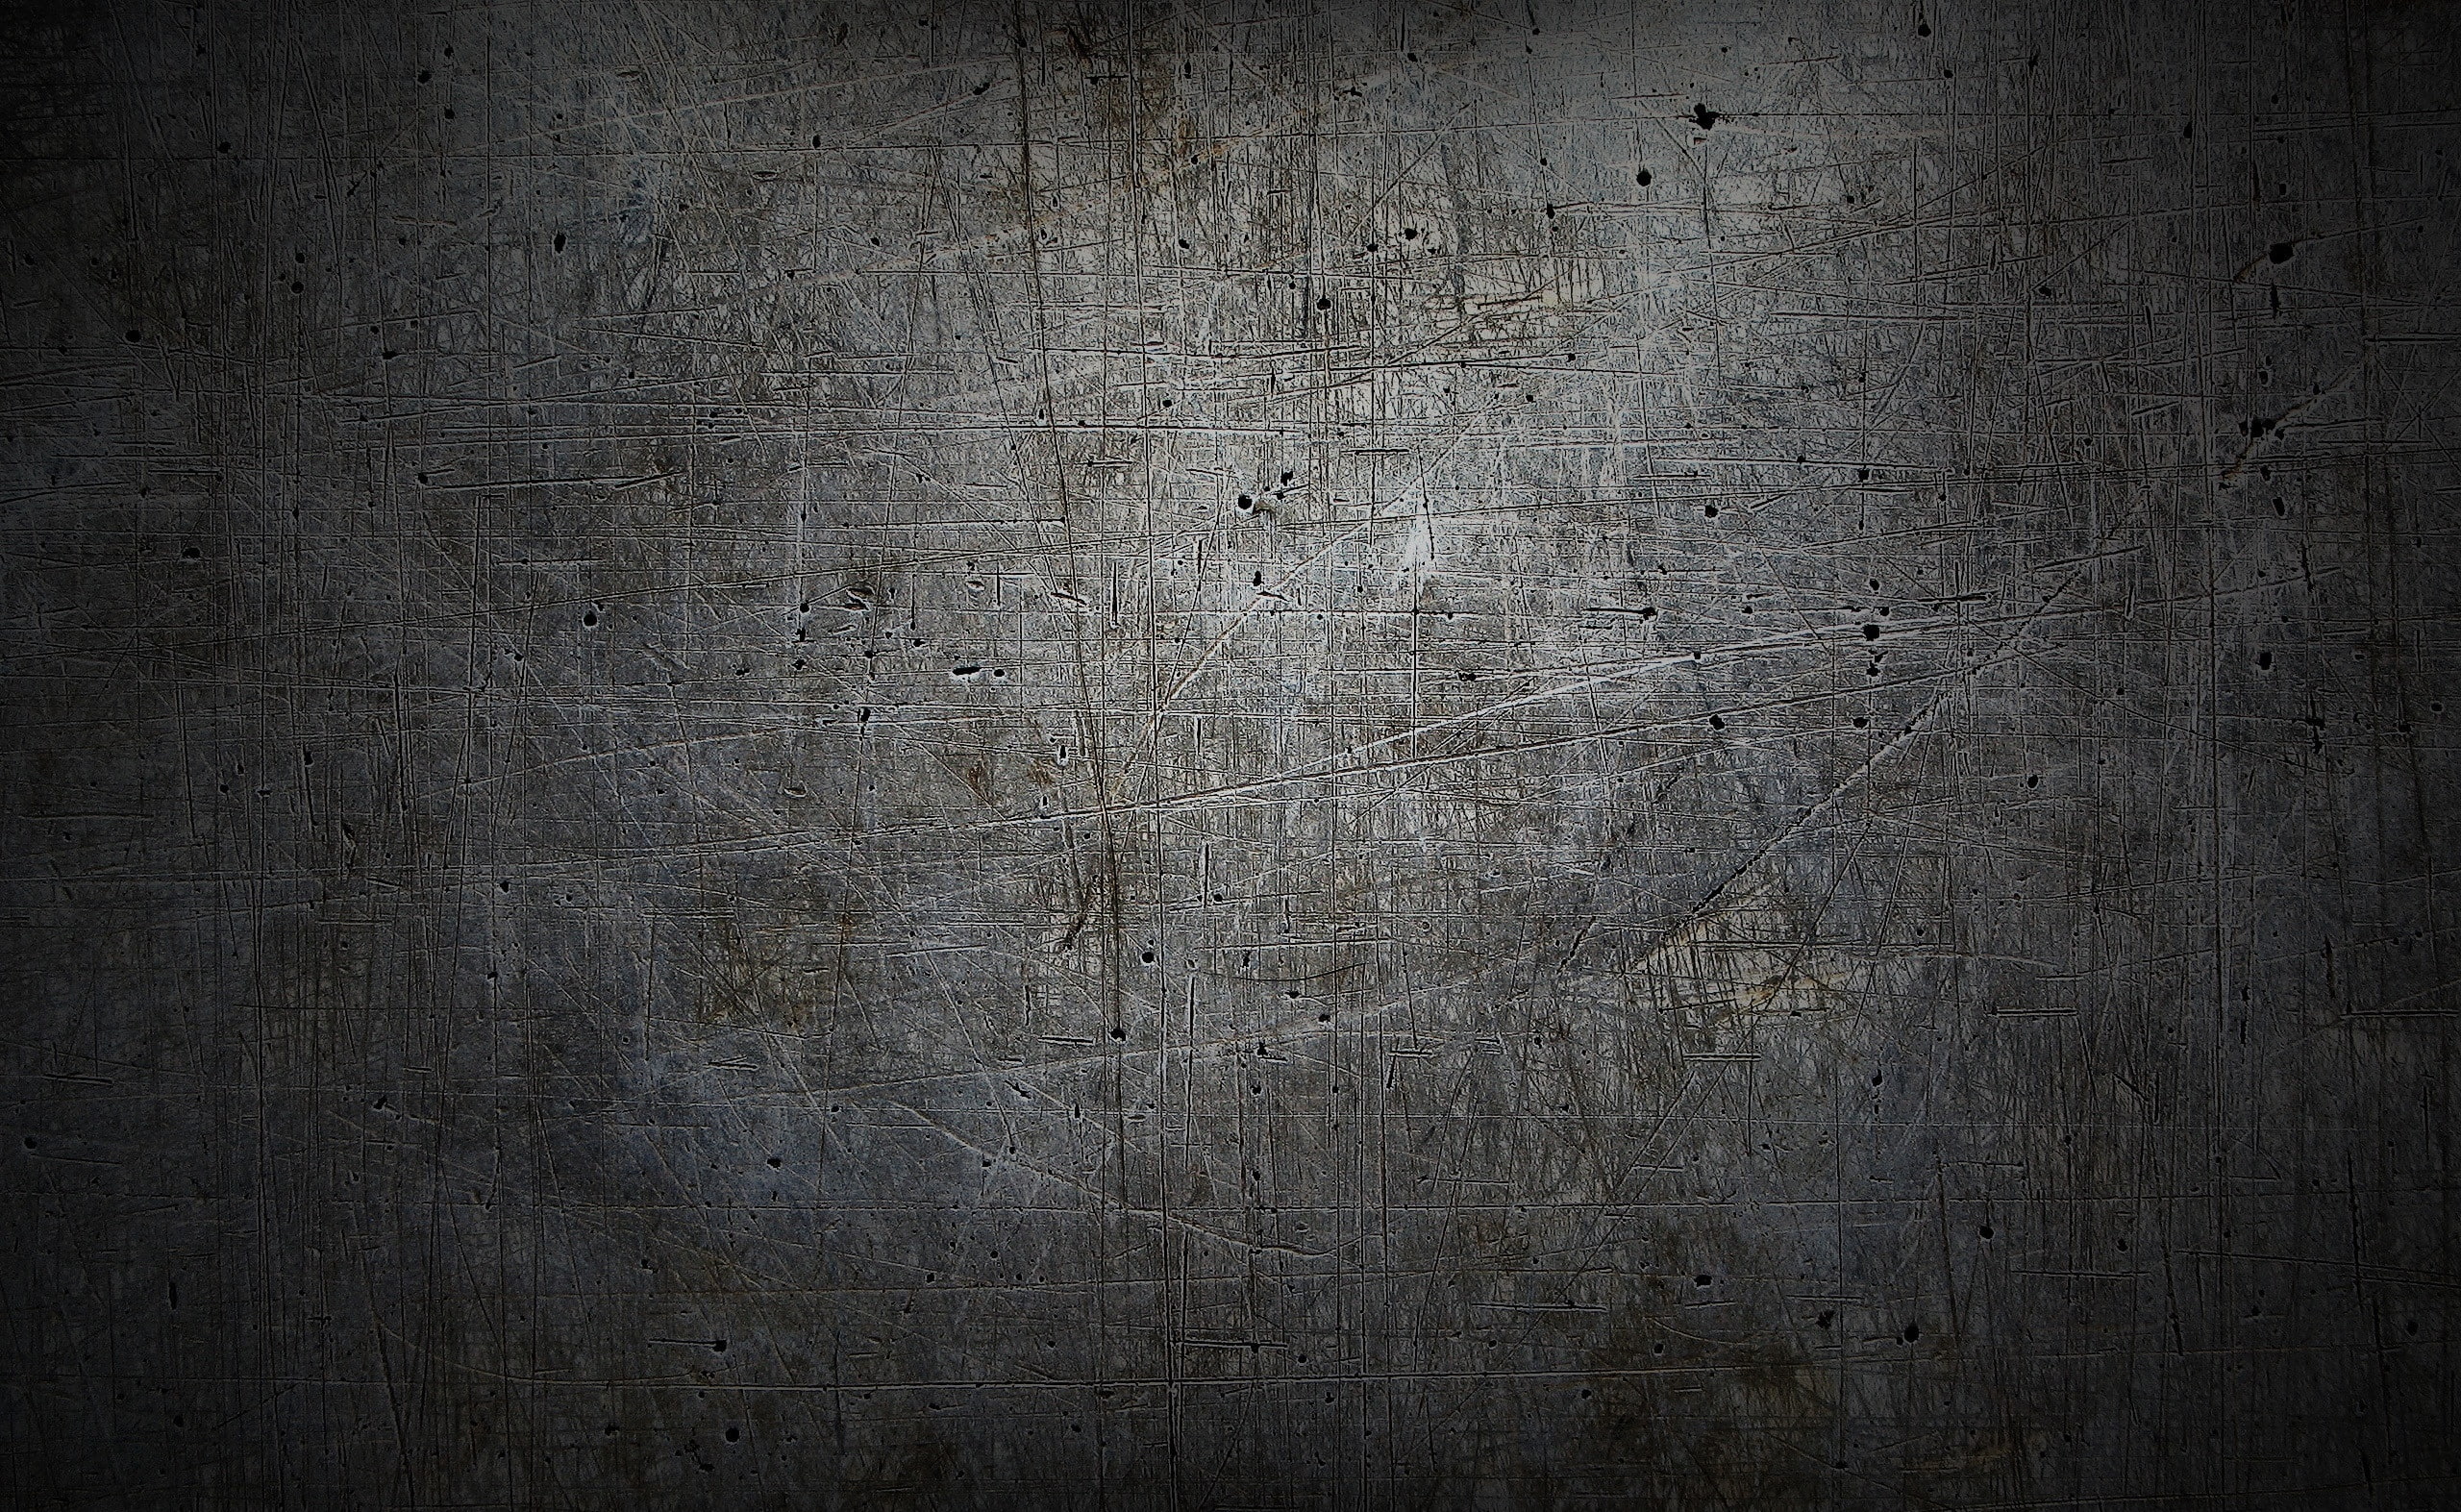 Scratches, Artistic, Grunge, textured, backgrounds, dirty, retro styled